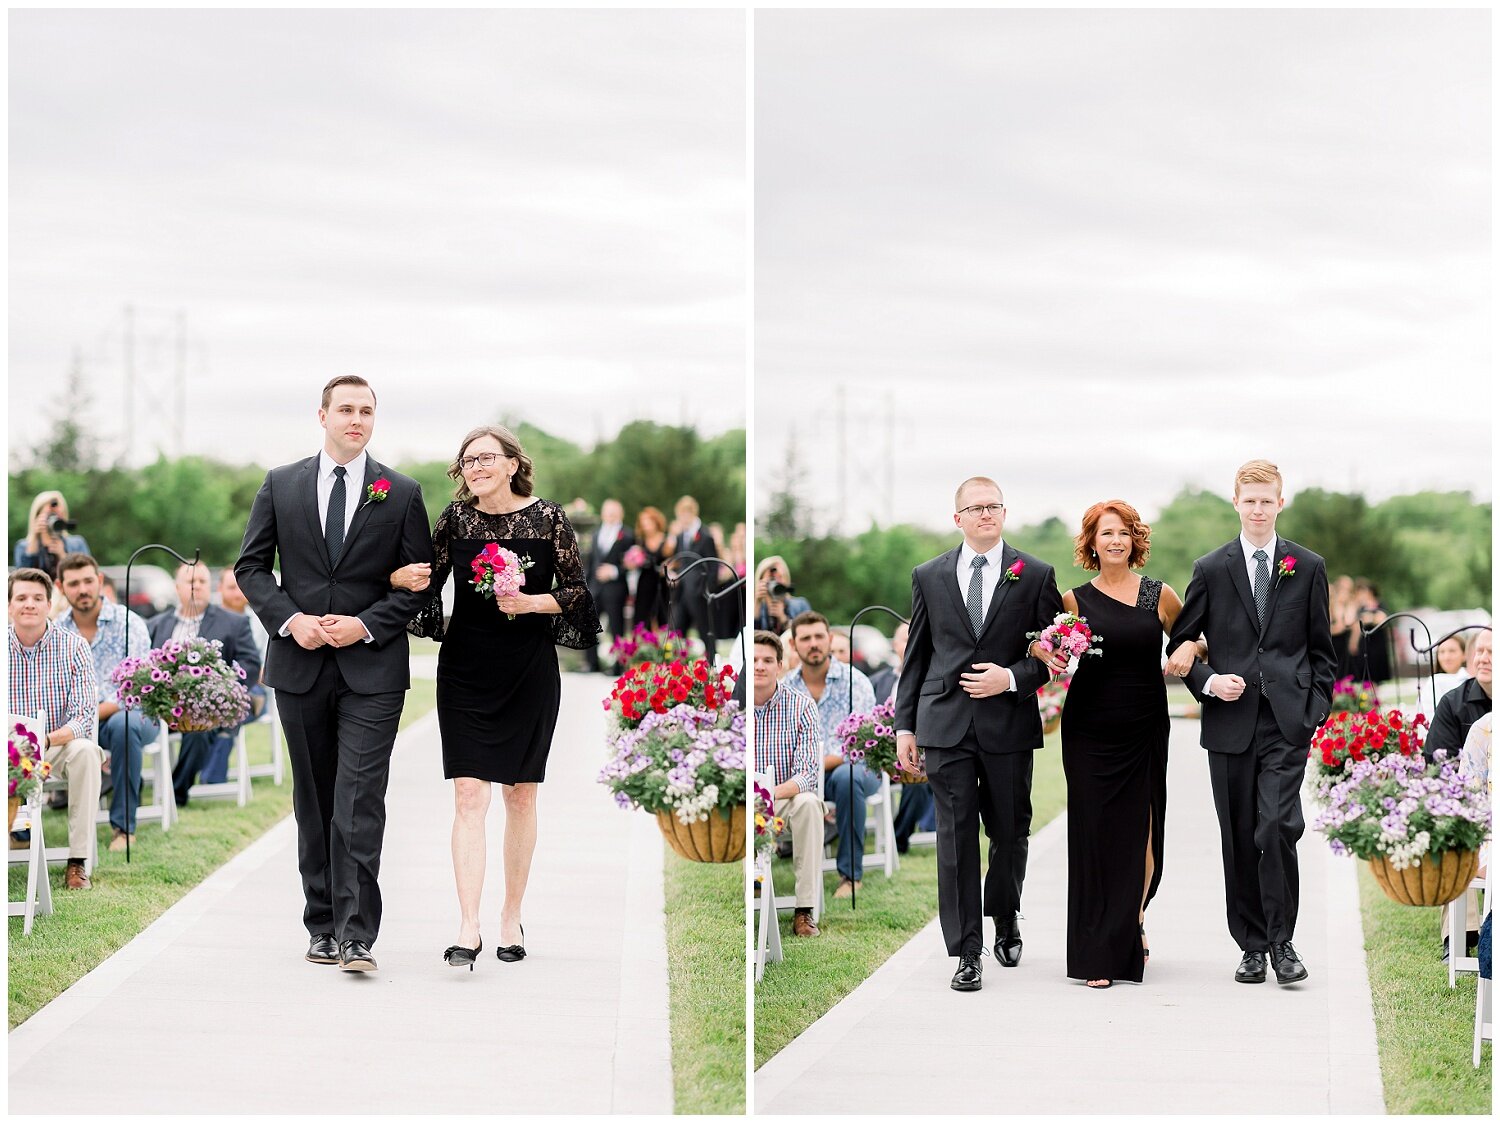 Sycamore-Tree-Wedding-Photography-Midwest-Photographer-G+C-05.2020-Elizabeth-Ladean-Photography-photo-_3372.jpg